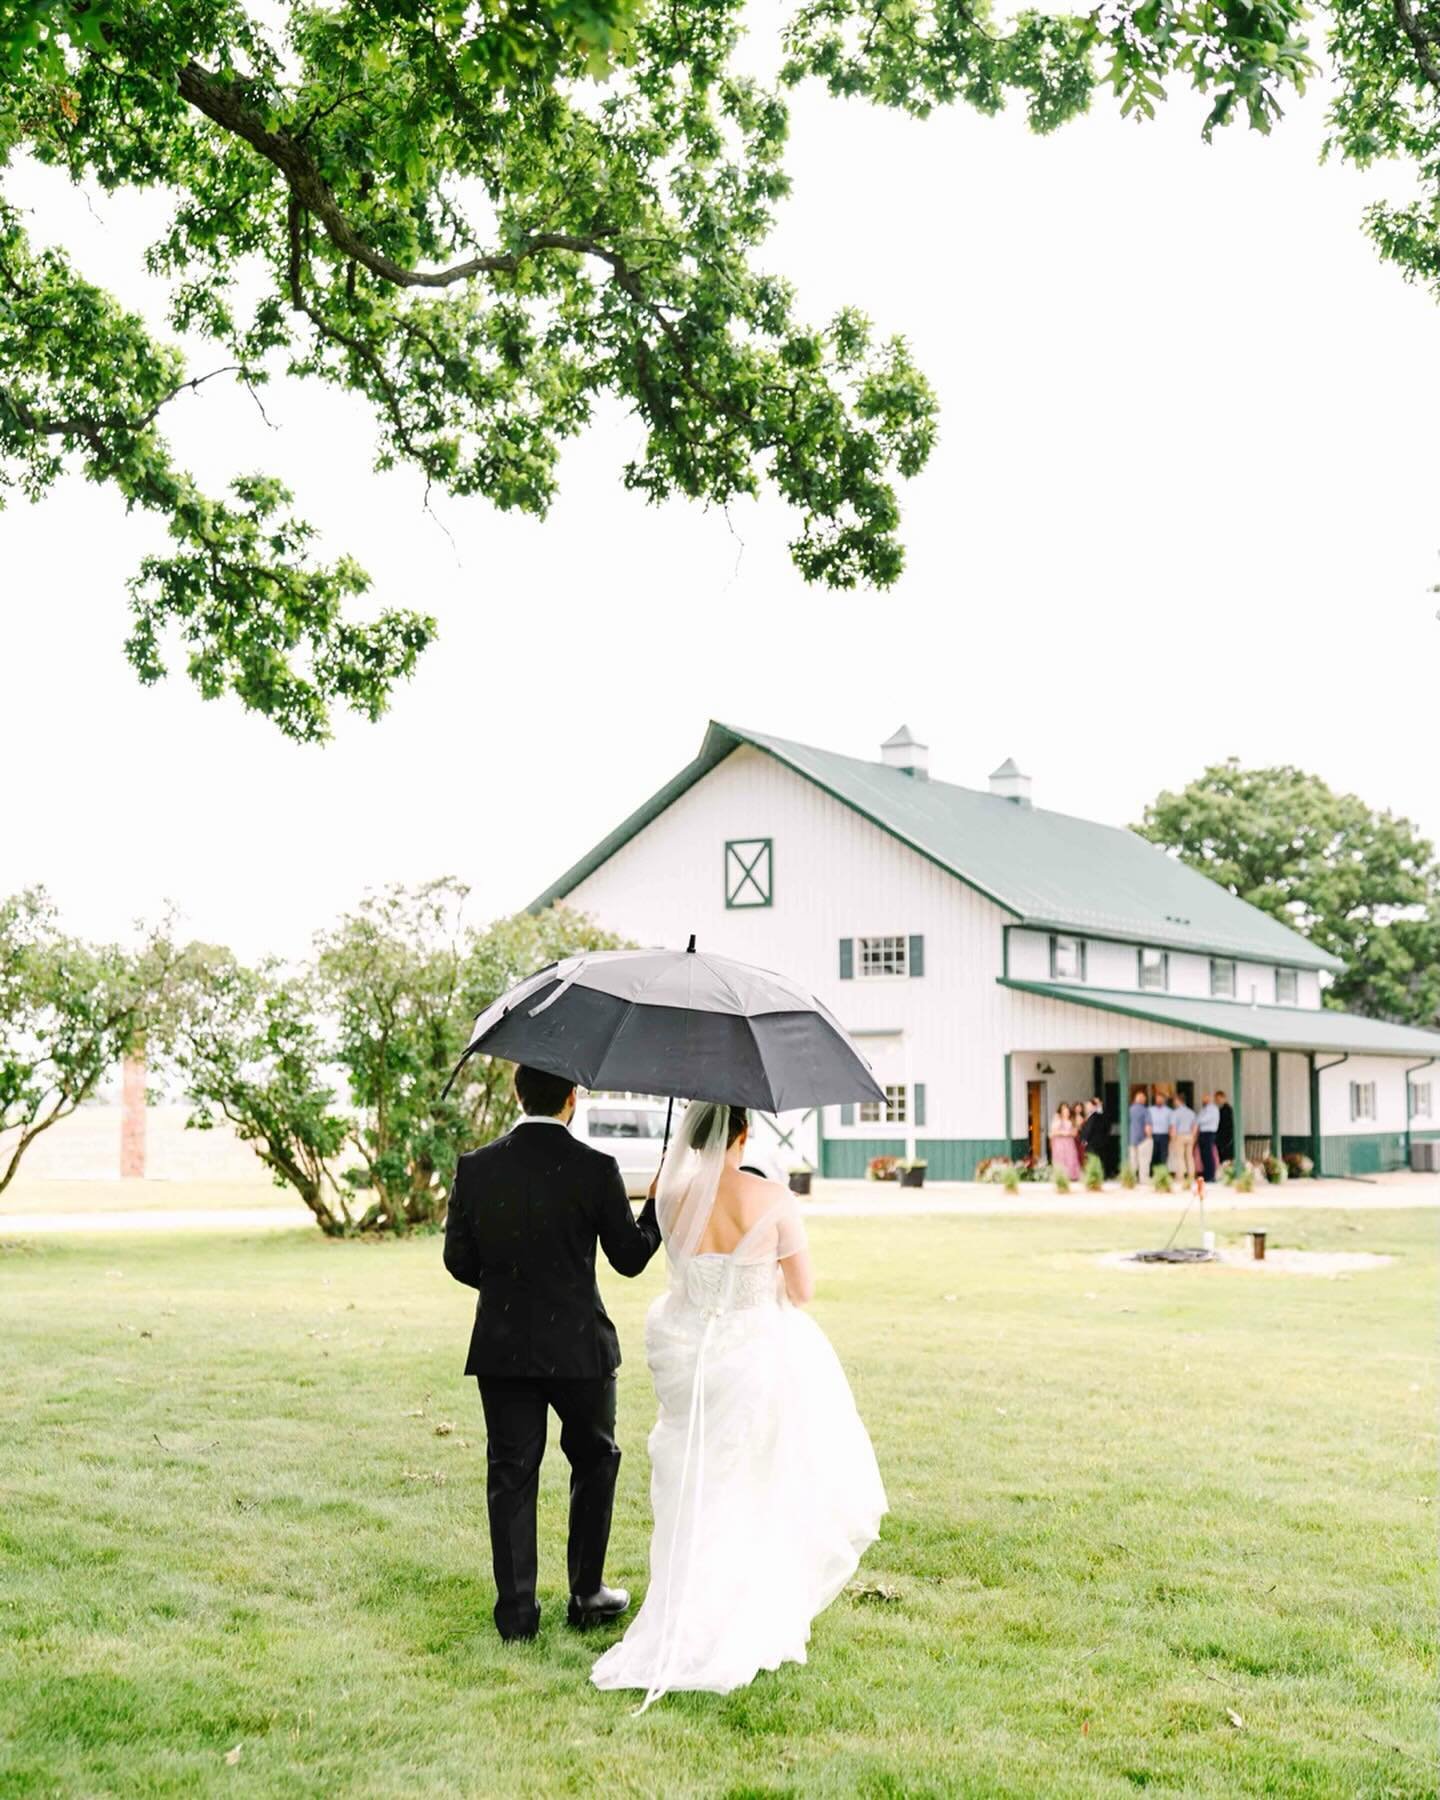 Friday was absolutely wonderful in every way. We absolutely love these families and feel so incredibly honored to have captured all the love and beauty from Sarah &amp; Mark&rsquo;s stunning wedding day hosted on Mark&rsquo;s family farm in Gardner, 